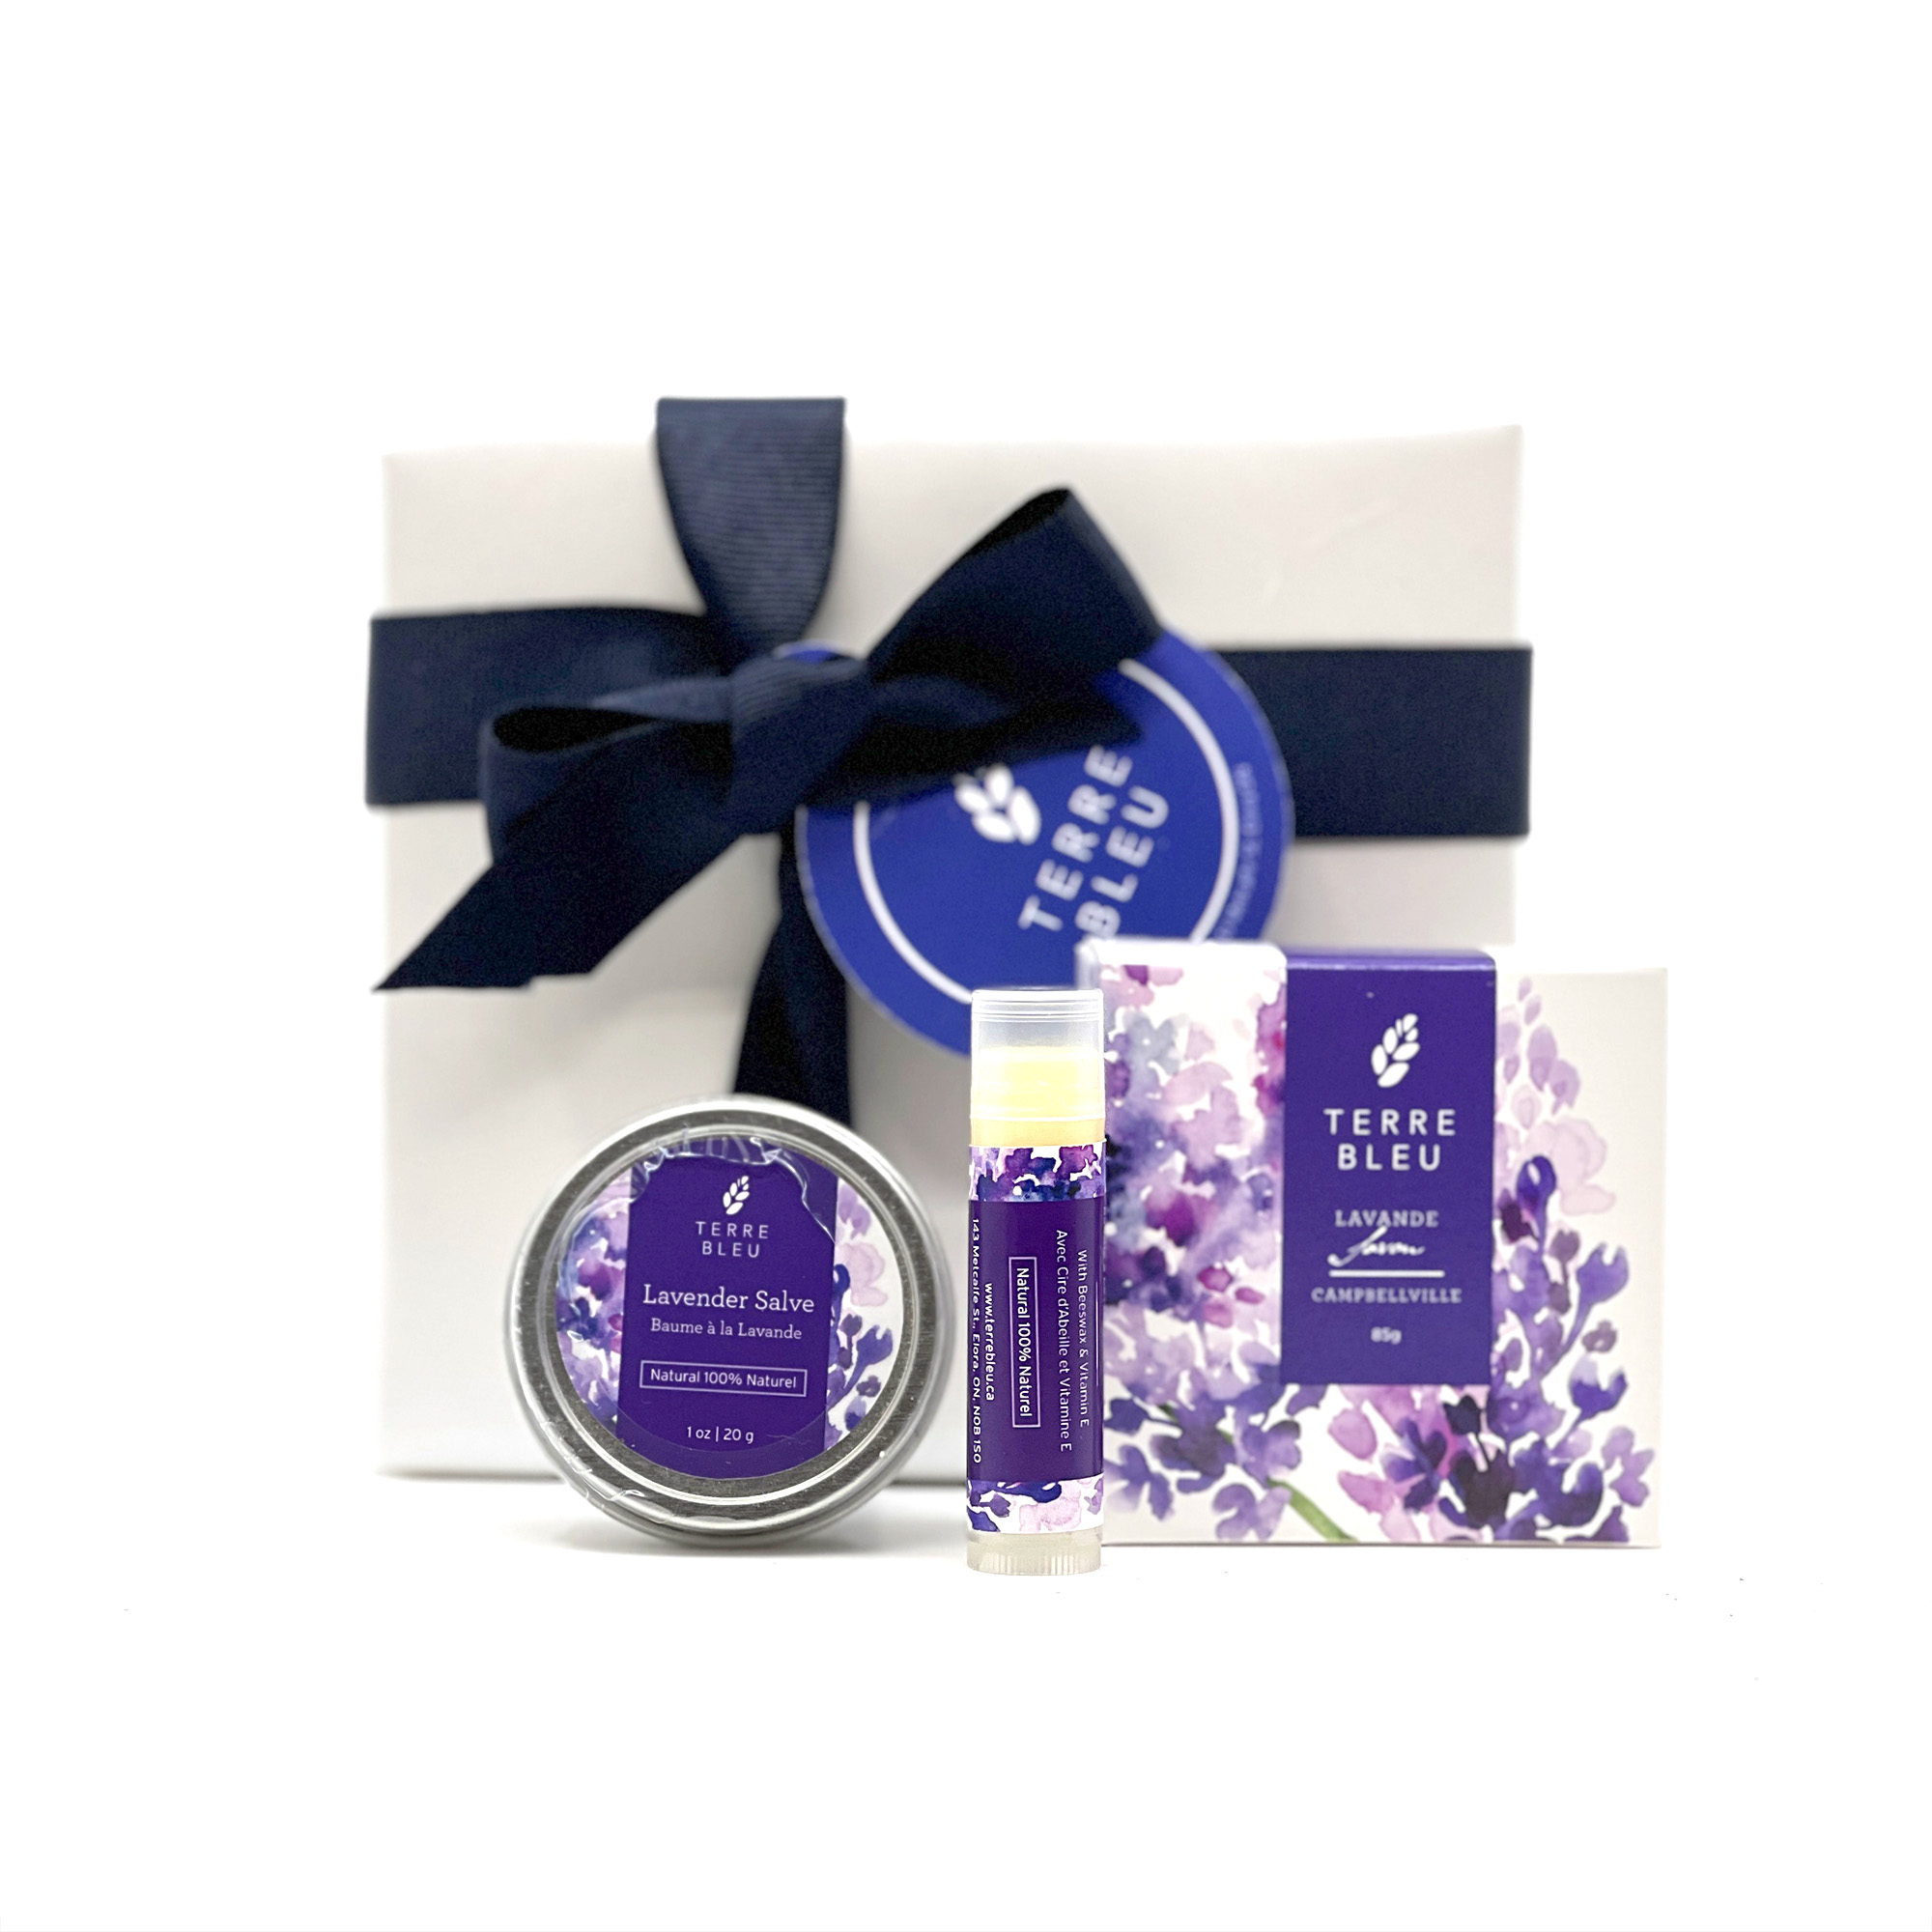 Bleum Is Back With A Sparkling New Look! 😍 - Terre Bleu Lavender Farm